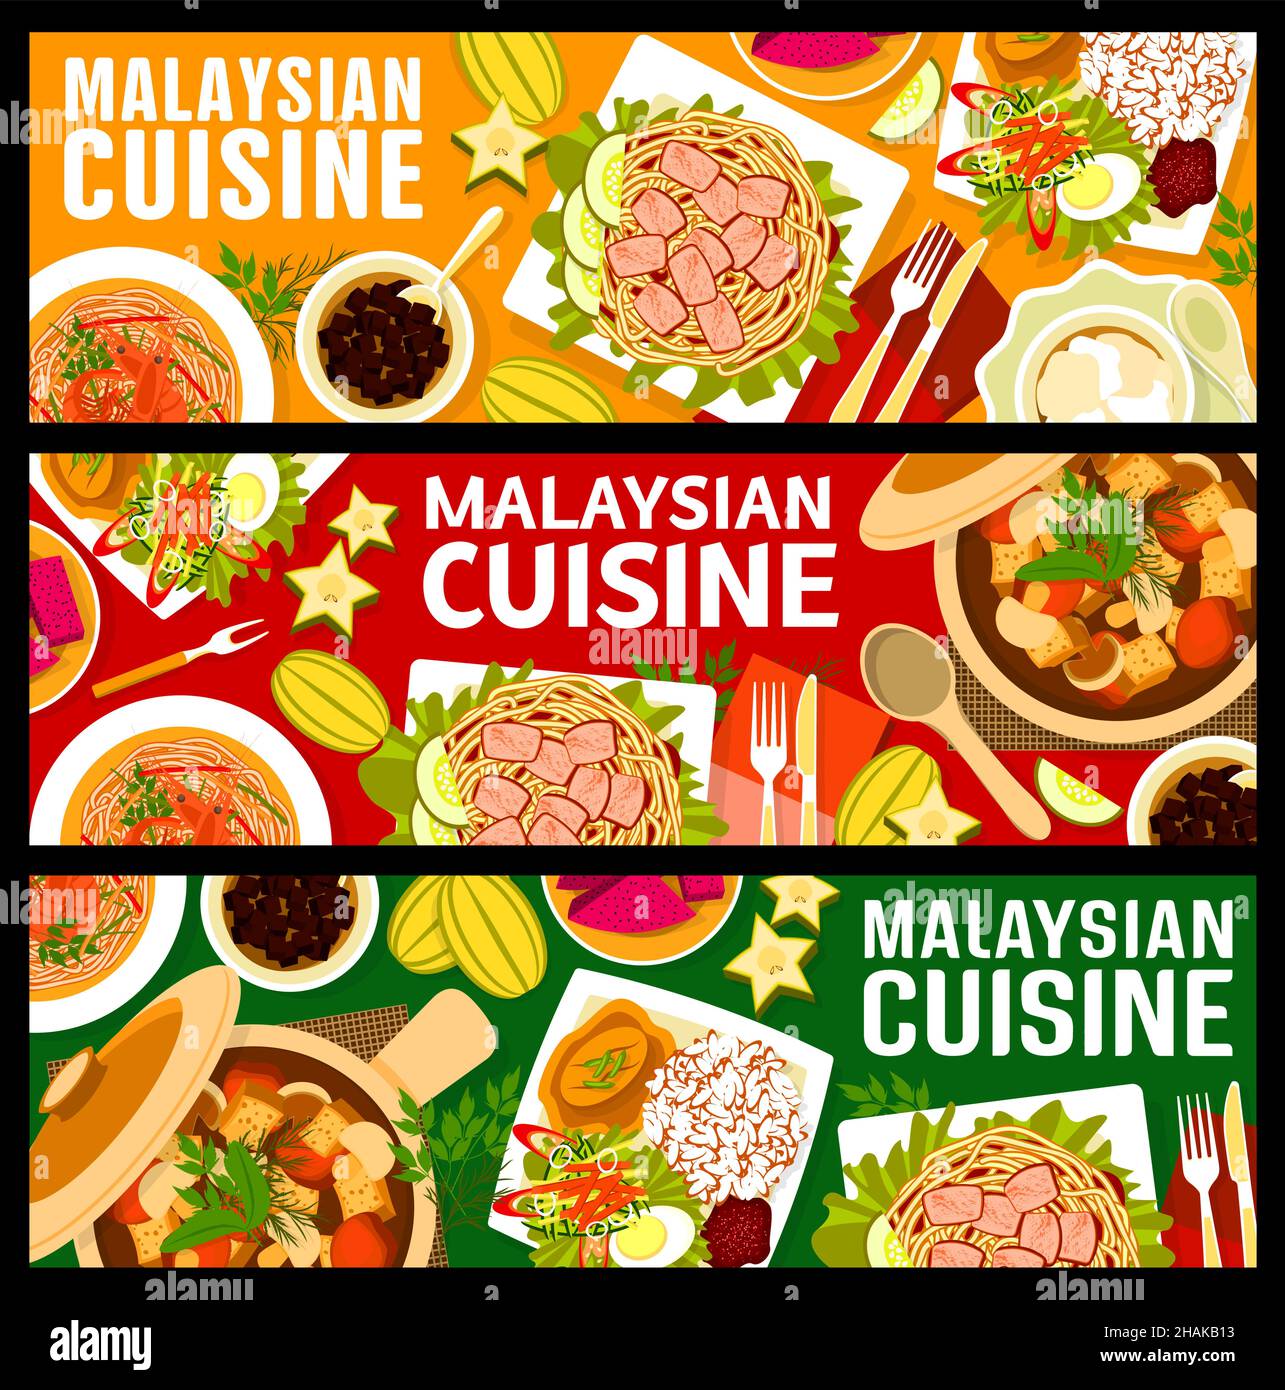 Malaysian cuisine food banners, Asian rice and Malay curry dishes ...